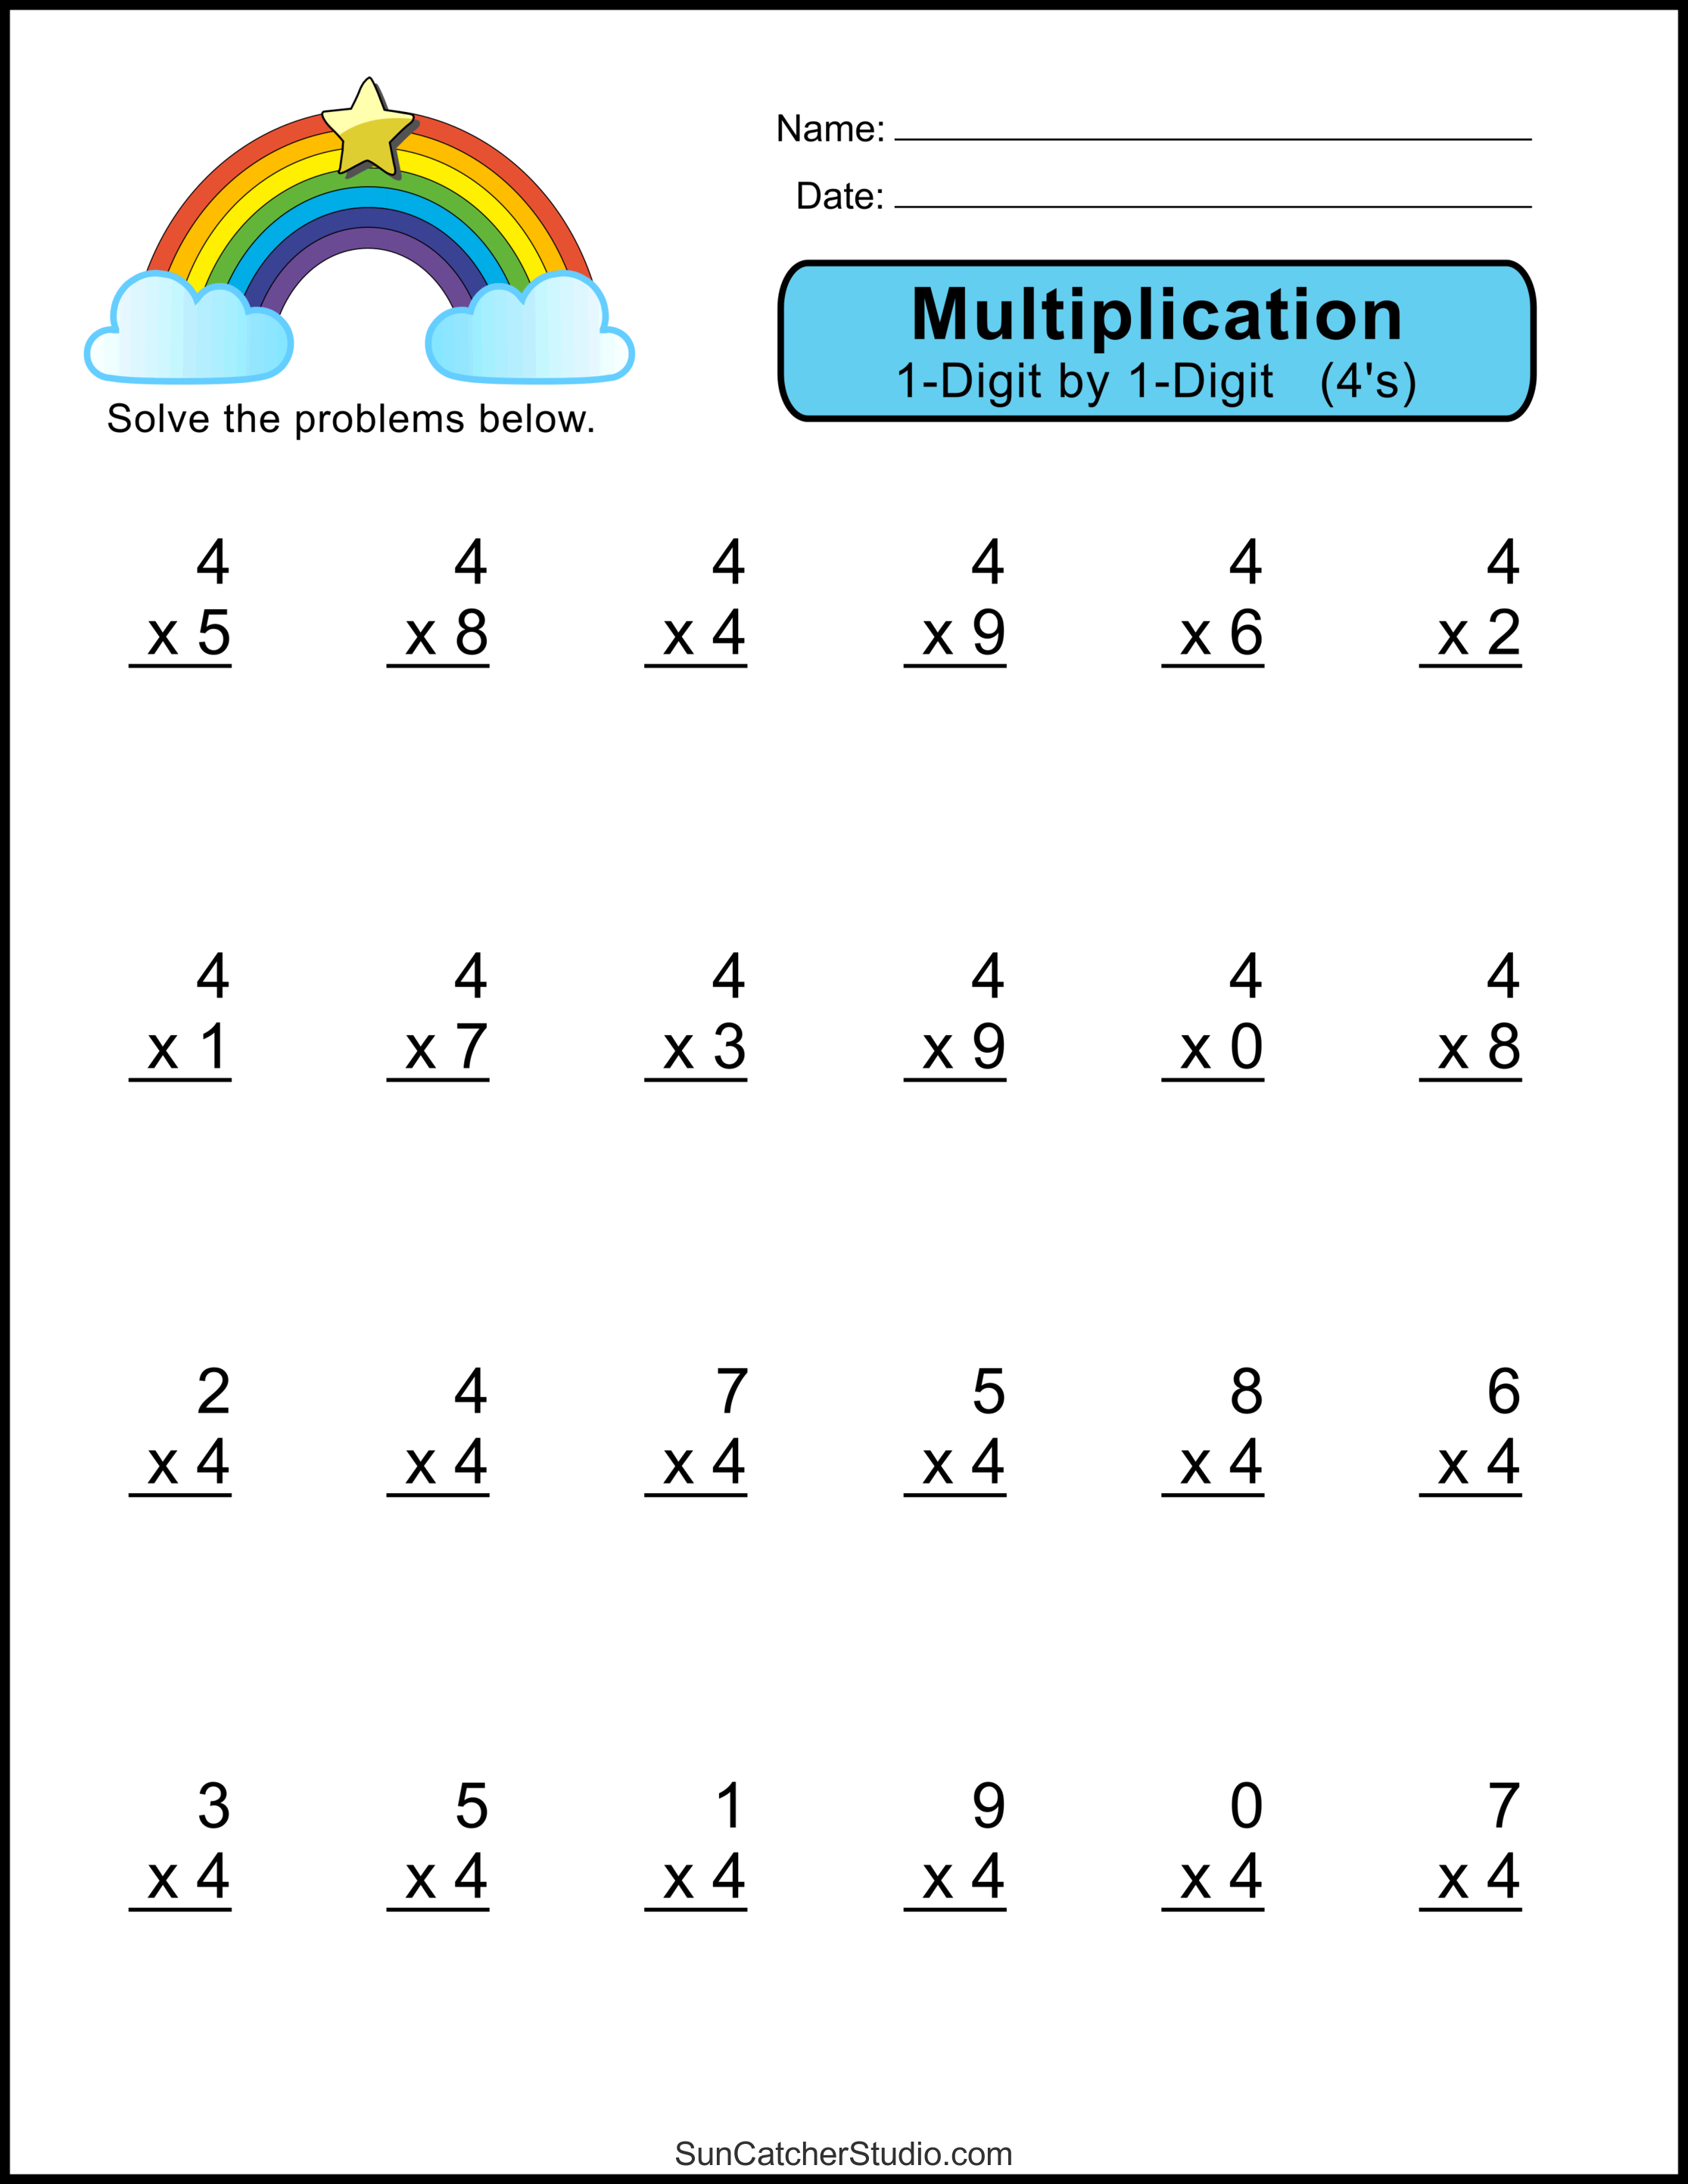 Multiplication Worksheets One Digit Math Drills DIY Projects Patterns Monograms Designs